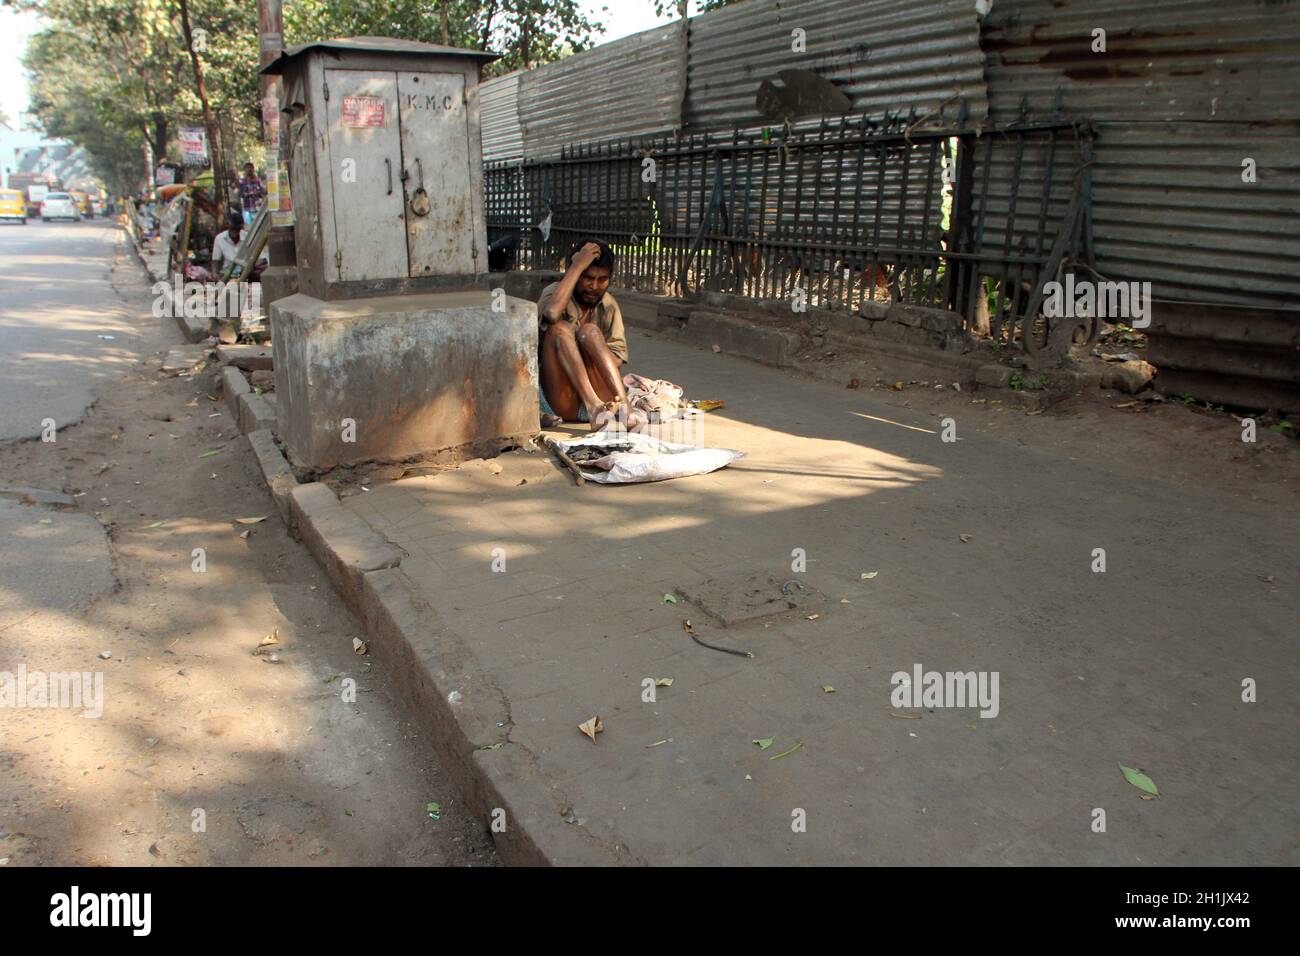 Streets of Kolkata. Thousands of beggars are the most disadvantaged castes living in the streets. Stock Photo